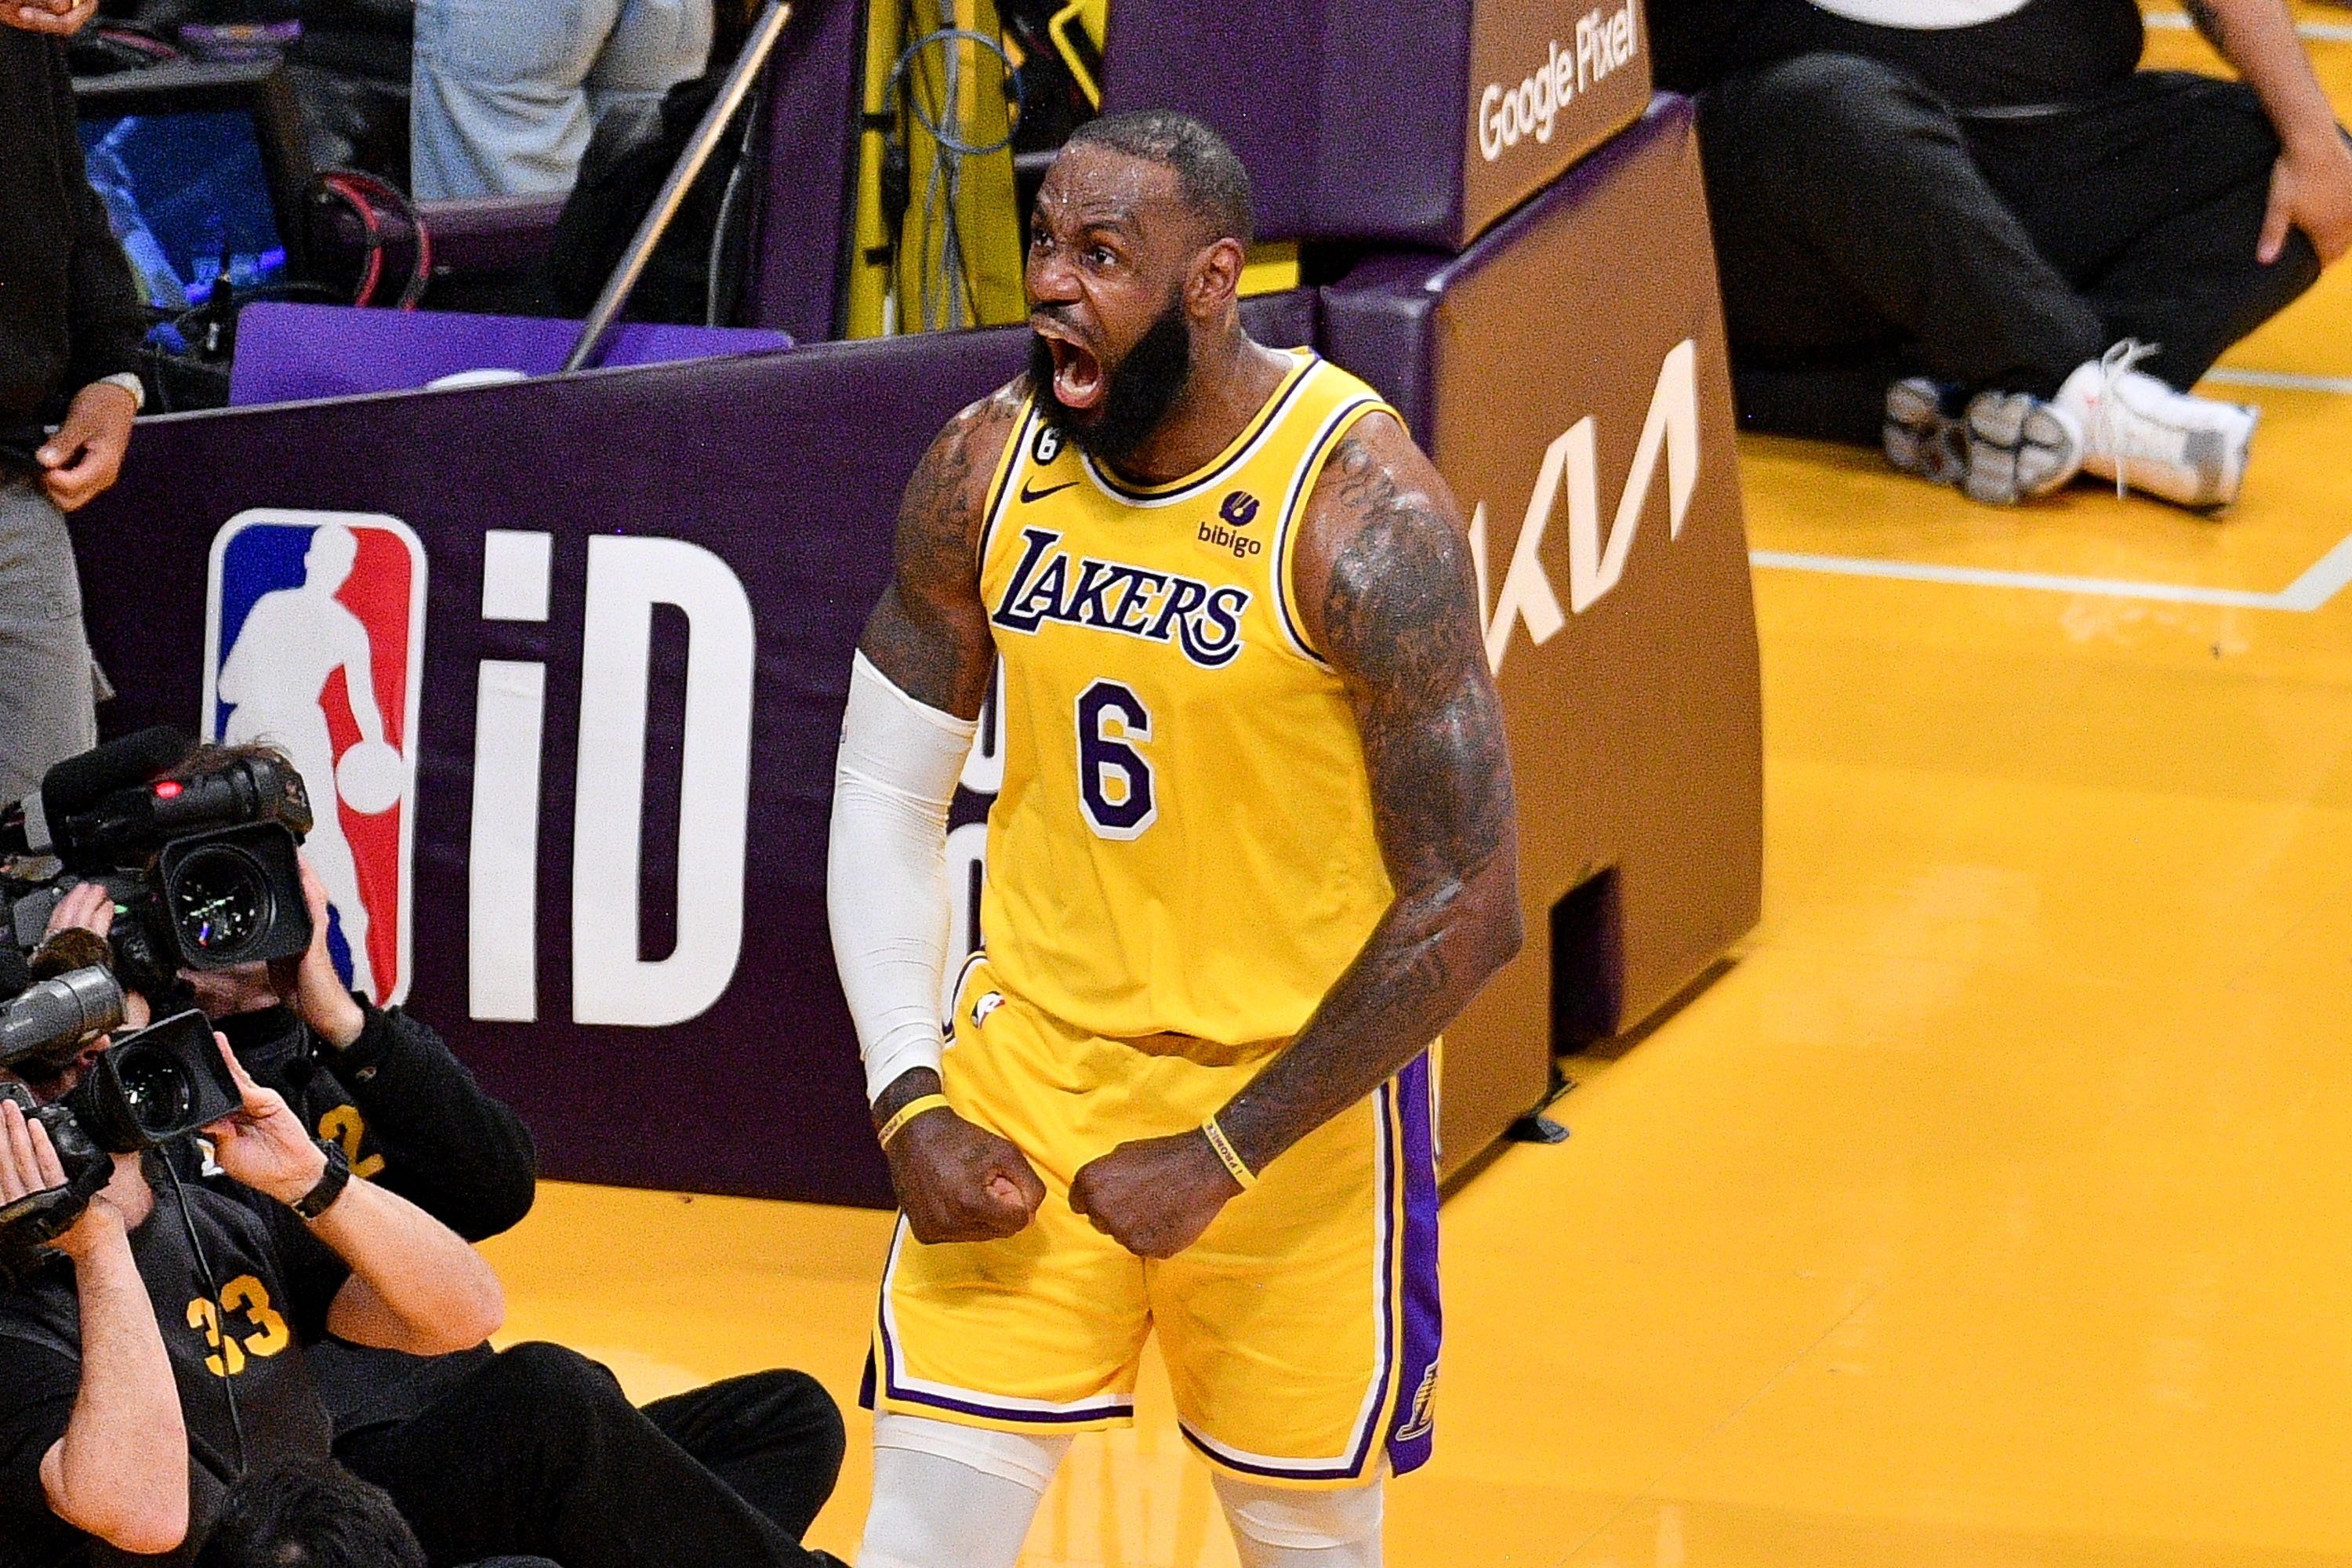 10 milestones within reach for LeBron James as Lakers star returns